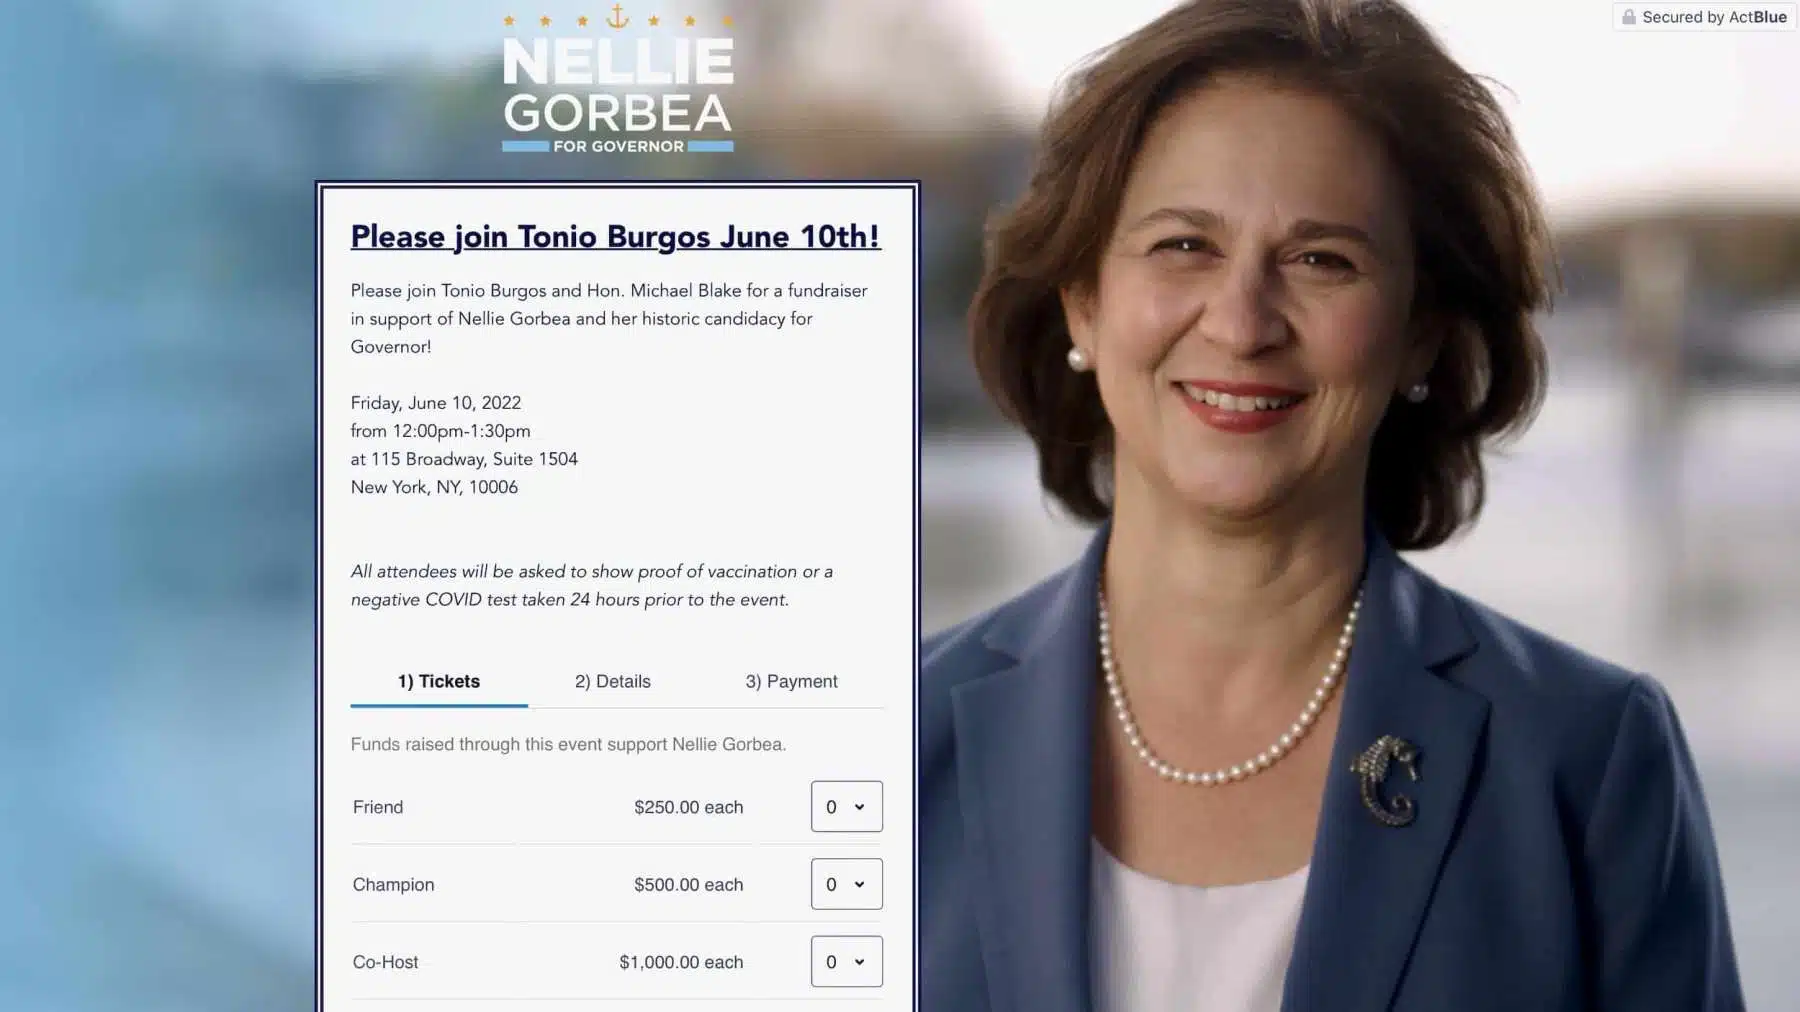 Rhode Island News: Gubernatorial candidate Gorbea defends taking campaign money from fossil fuel lobbyist